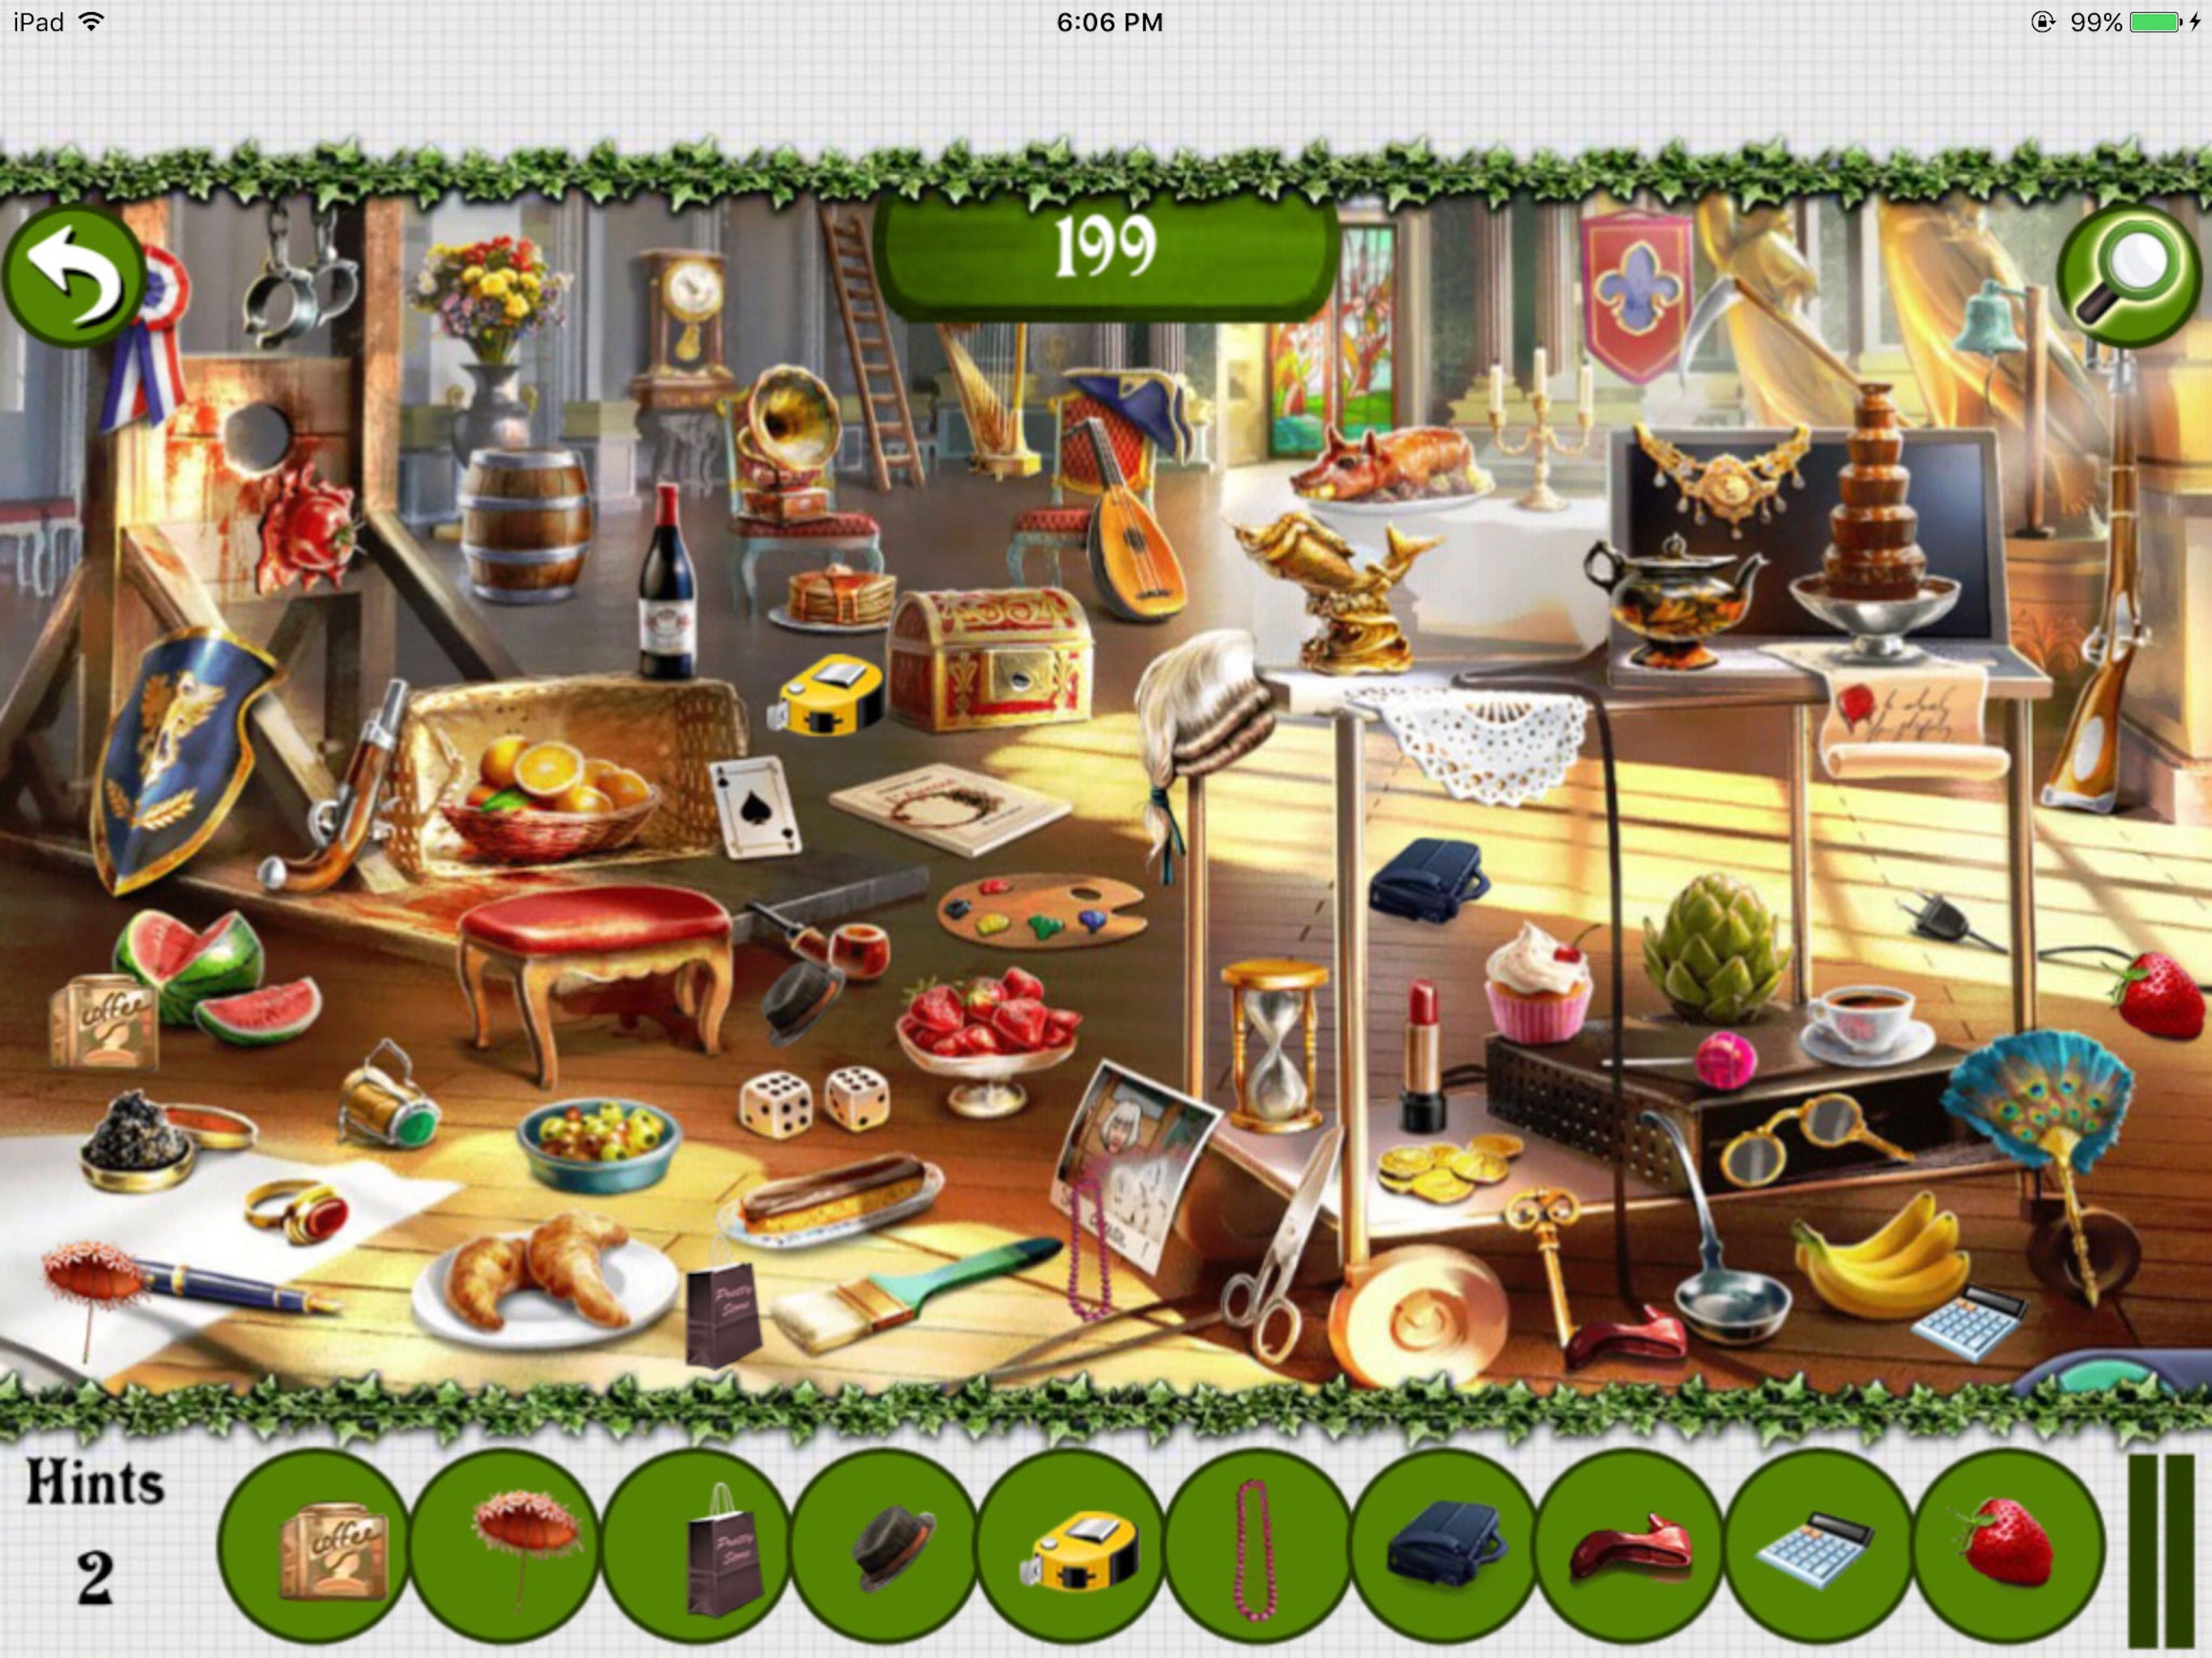 Farah Learning Fun: Hidden Object Game Numbers With Hint / Hidden ...